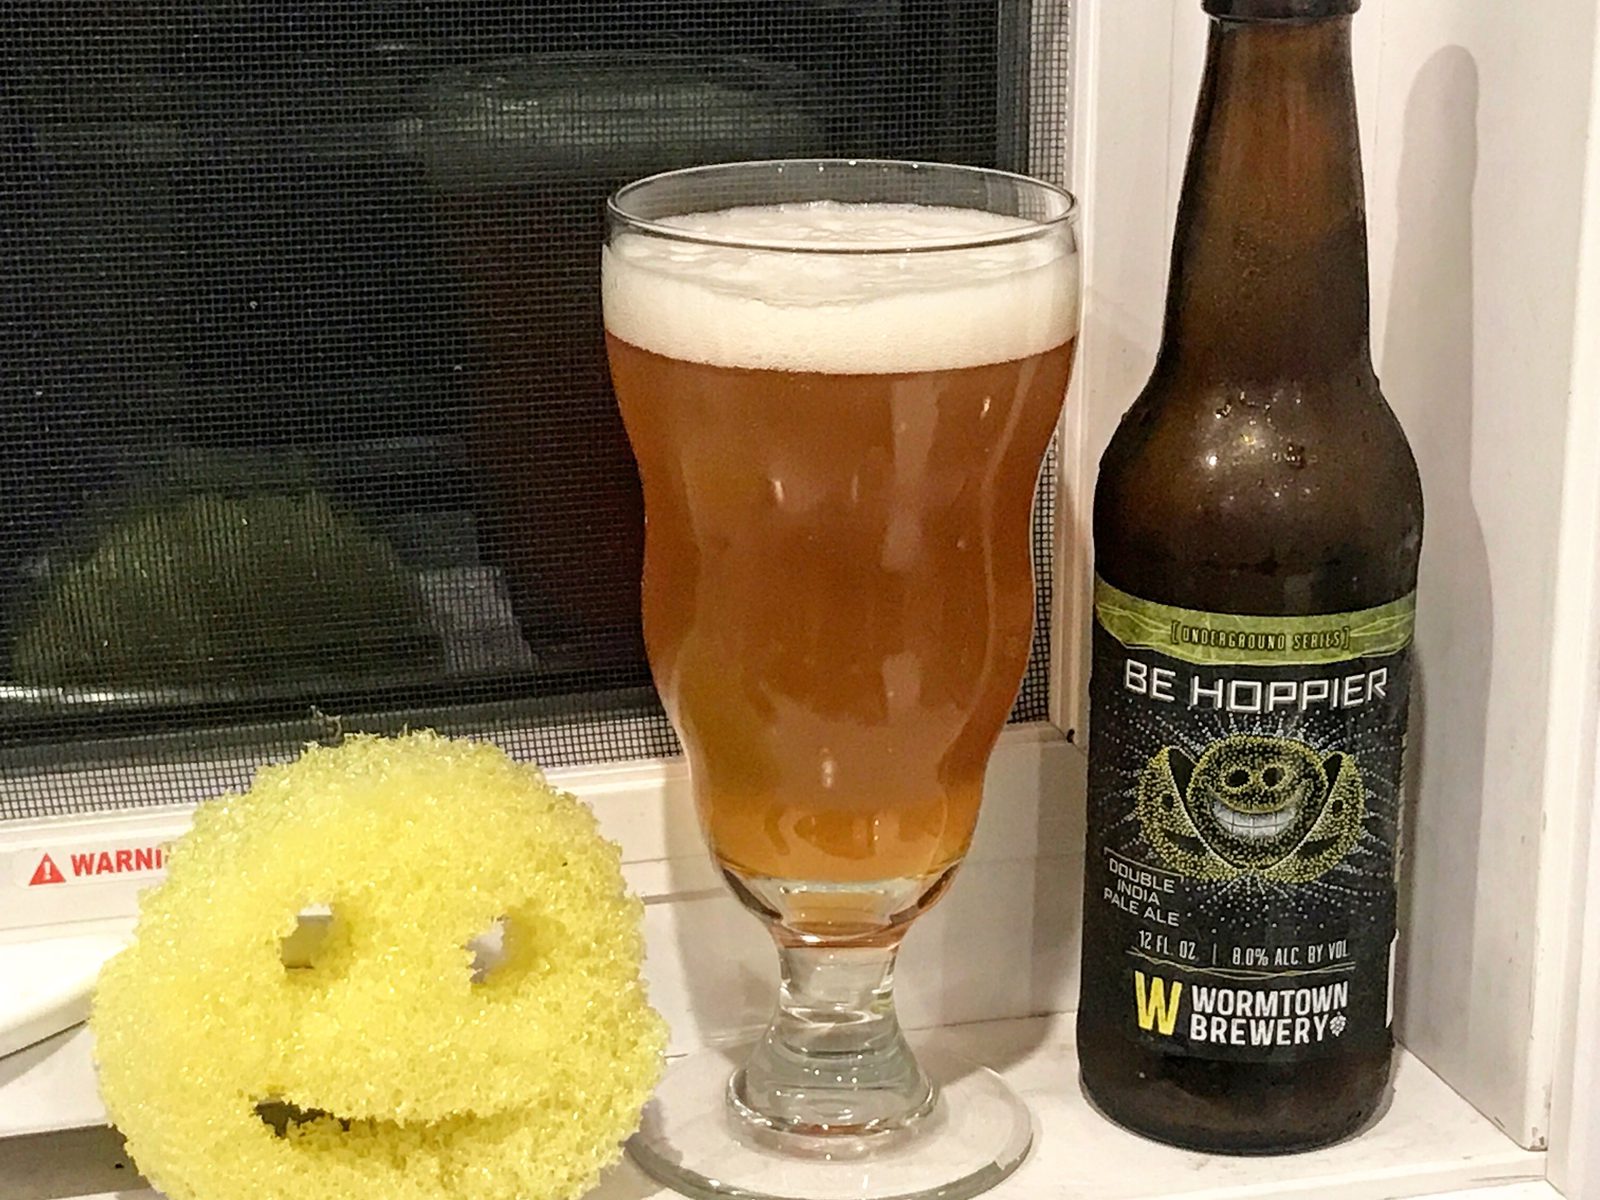 Wormtown Brewery: Be Hoppier